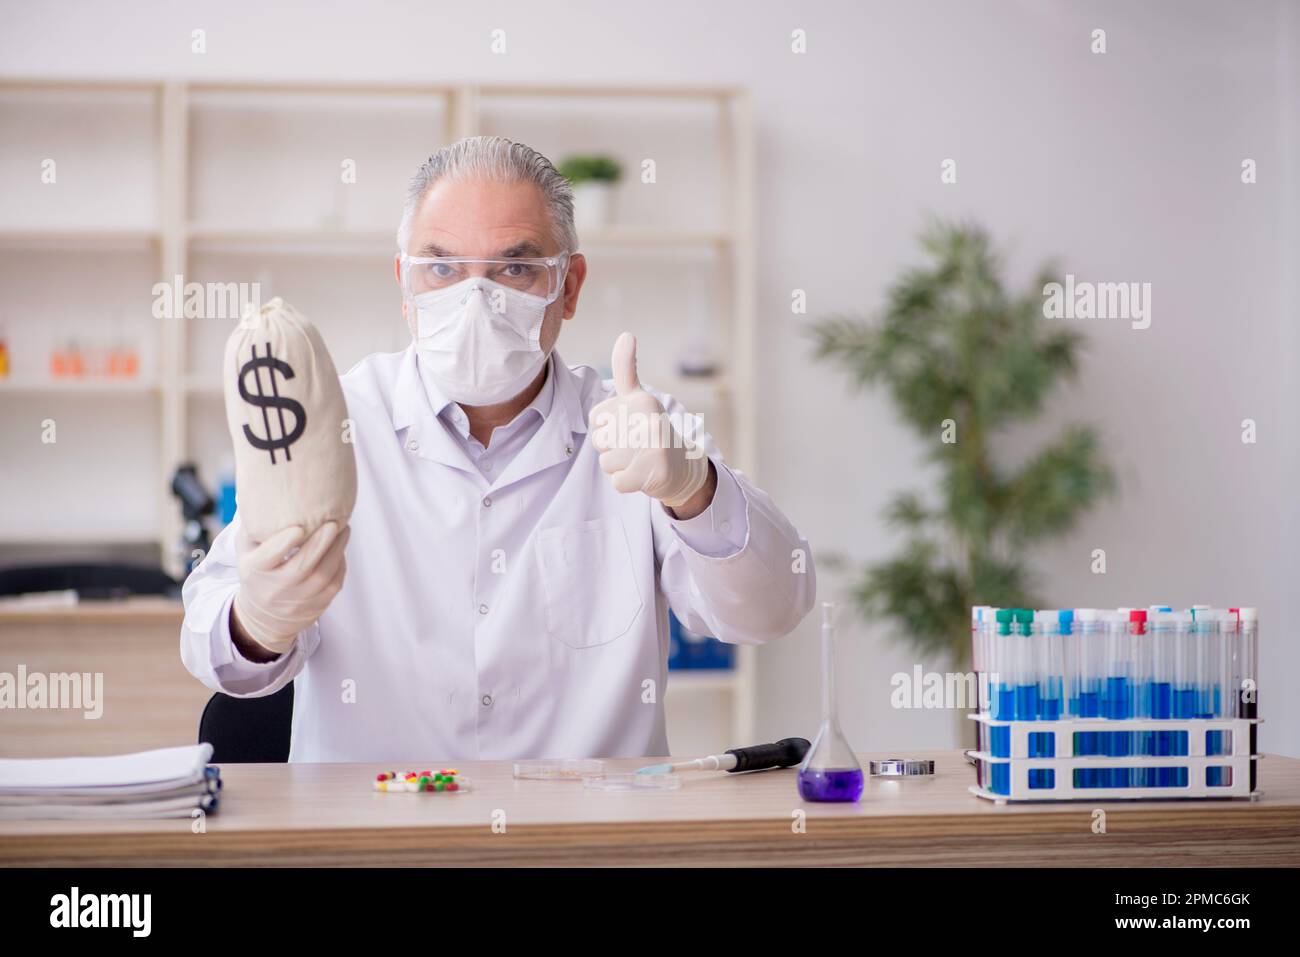 Old chemist in remuneration concept Stock Photo